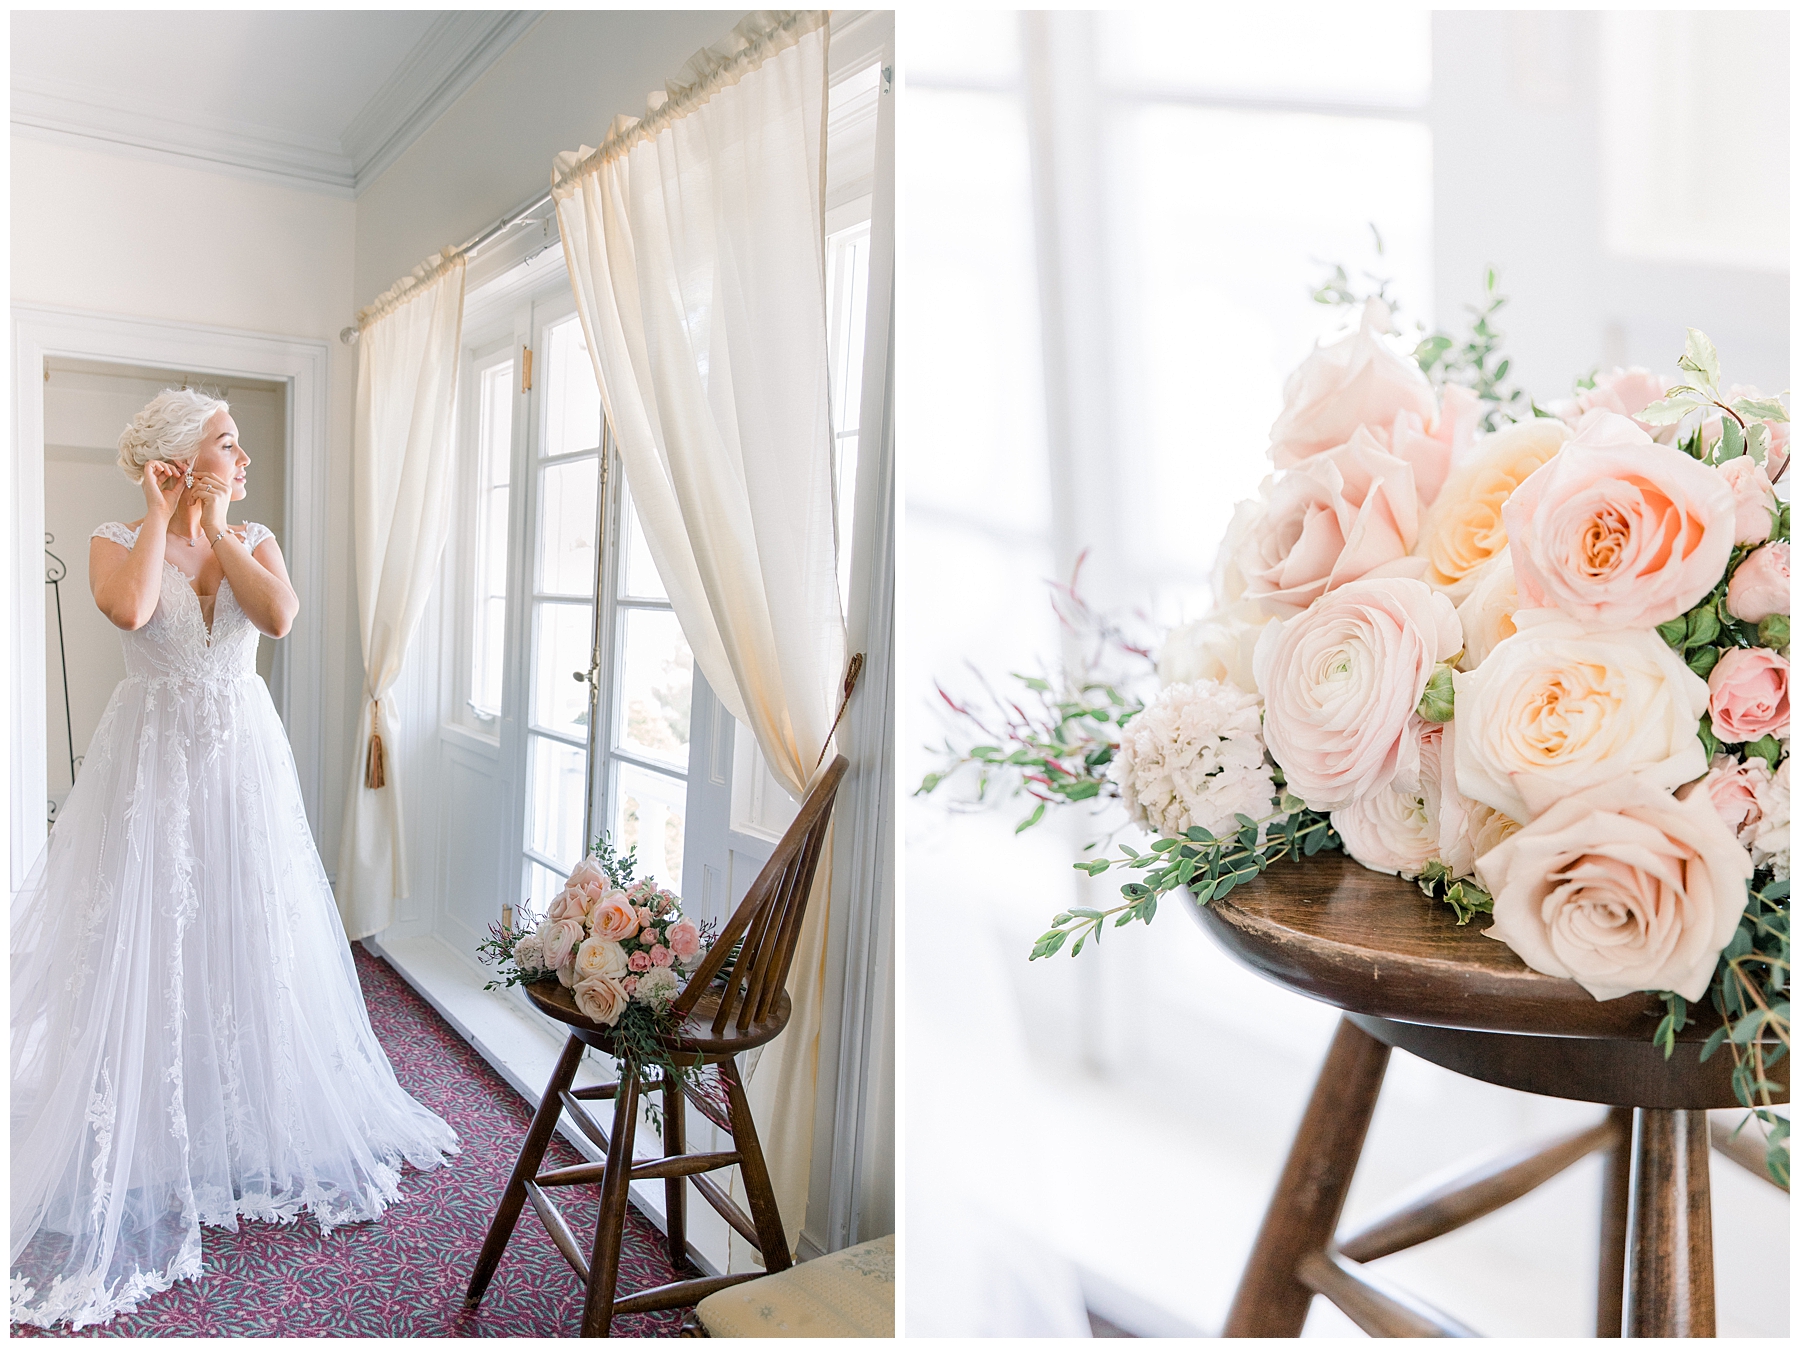 Bride and flower details from Tupper Manor Wedding | A Romantic Modern European Inspired Wedding Editorial